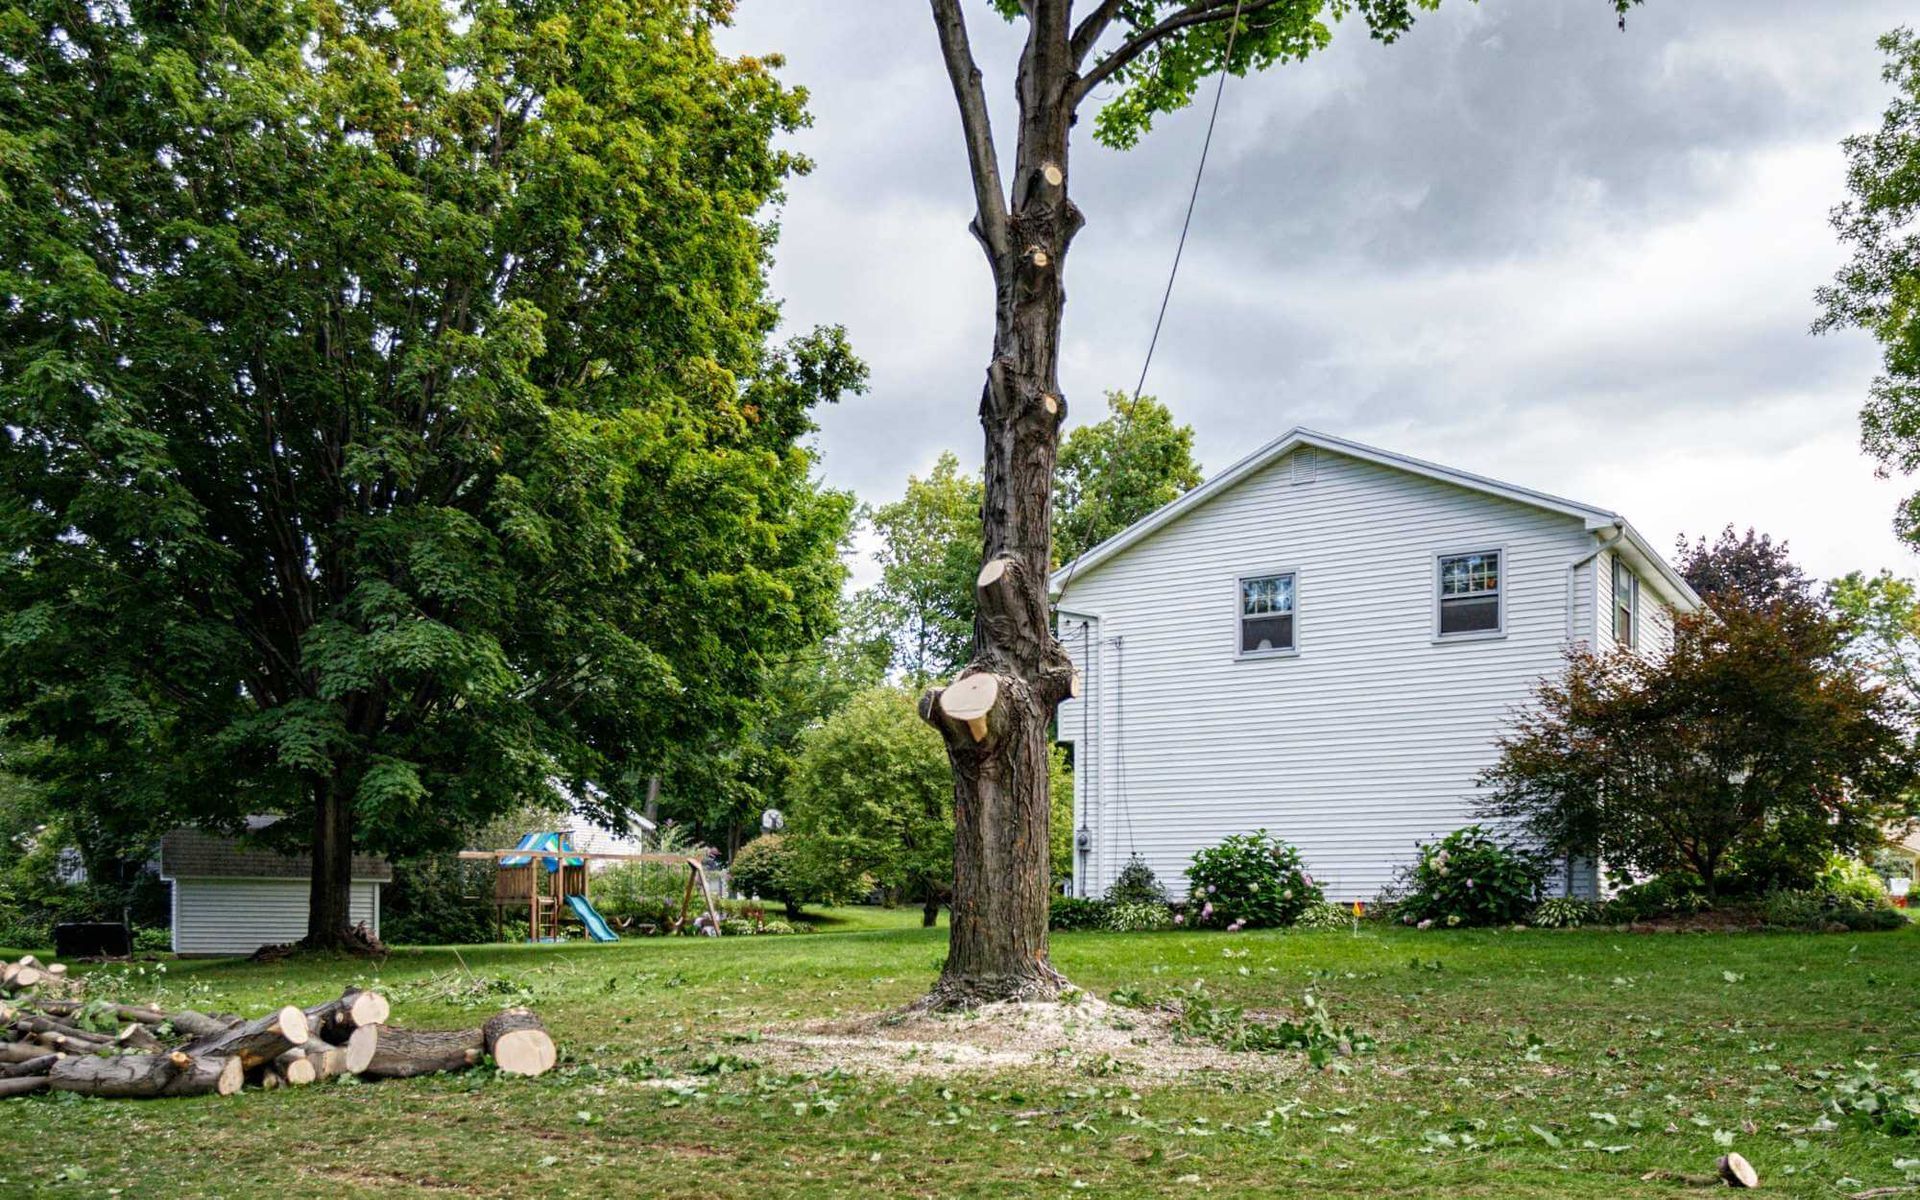 Tree Removal Permit: Legal Considerations and Restrictions